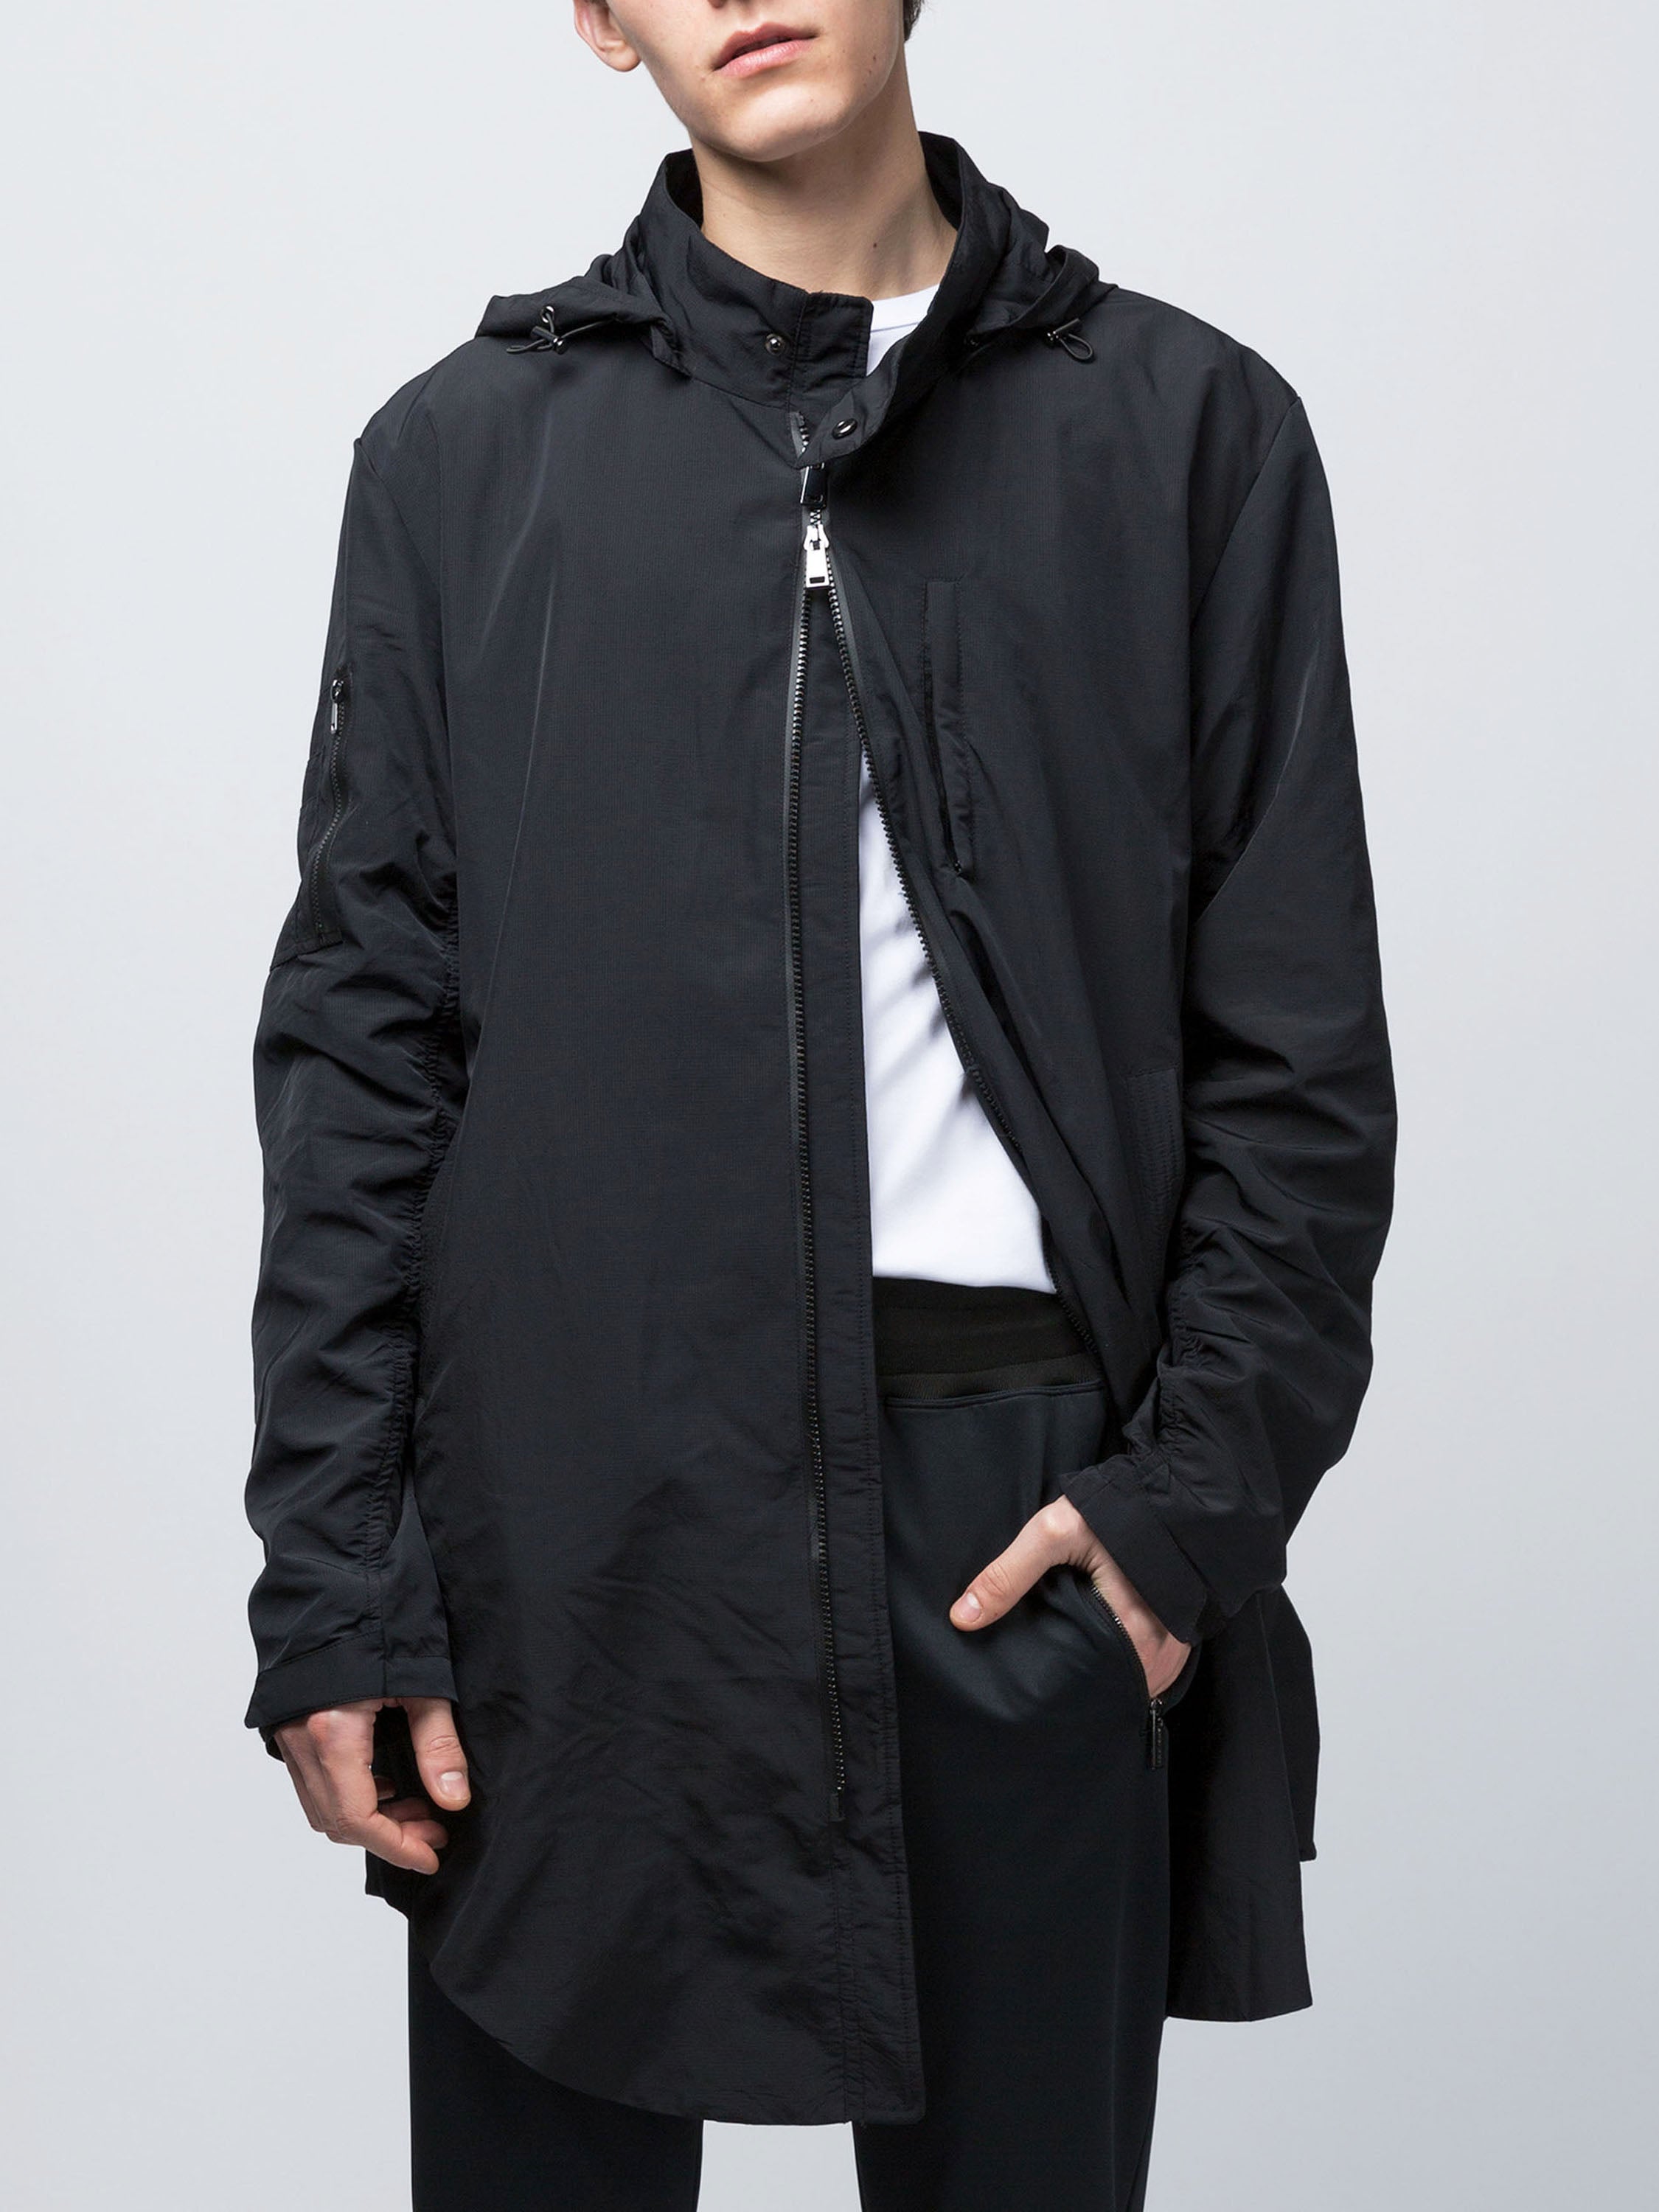 2-in-1 Transformable Down-filled Double Layer Jacket